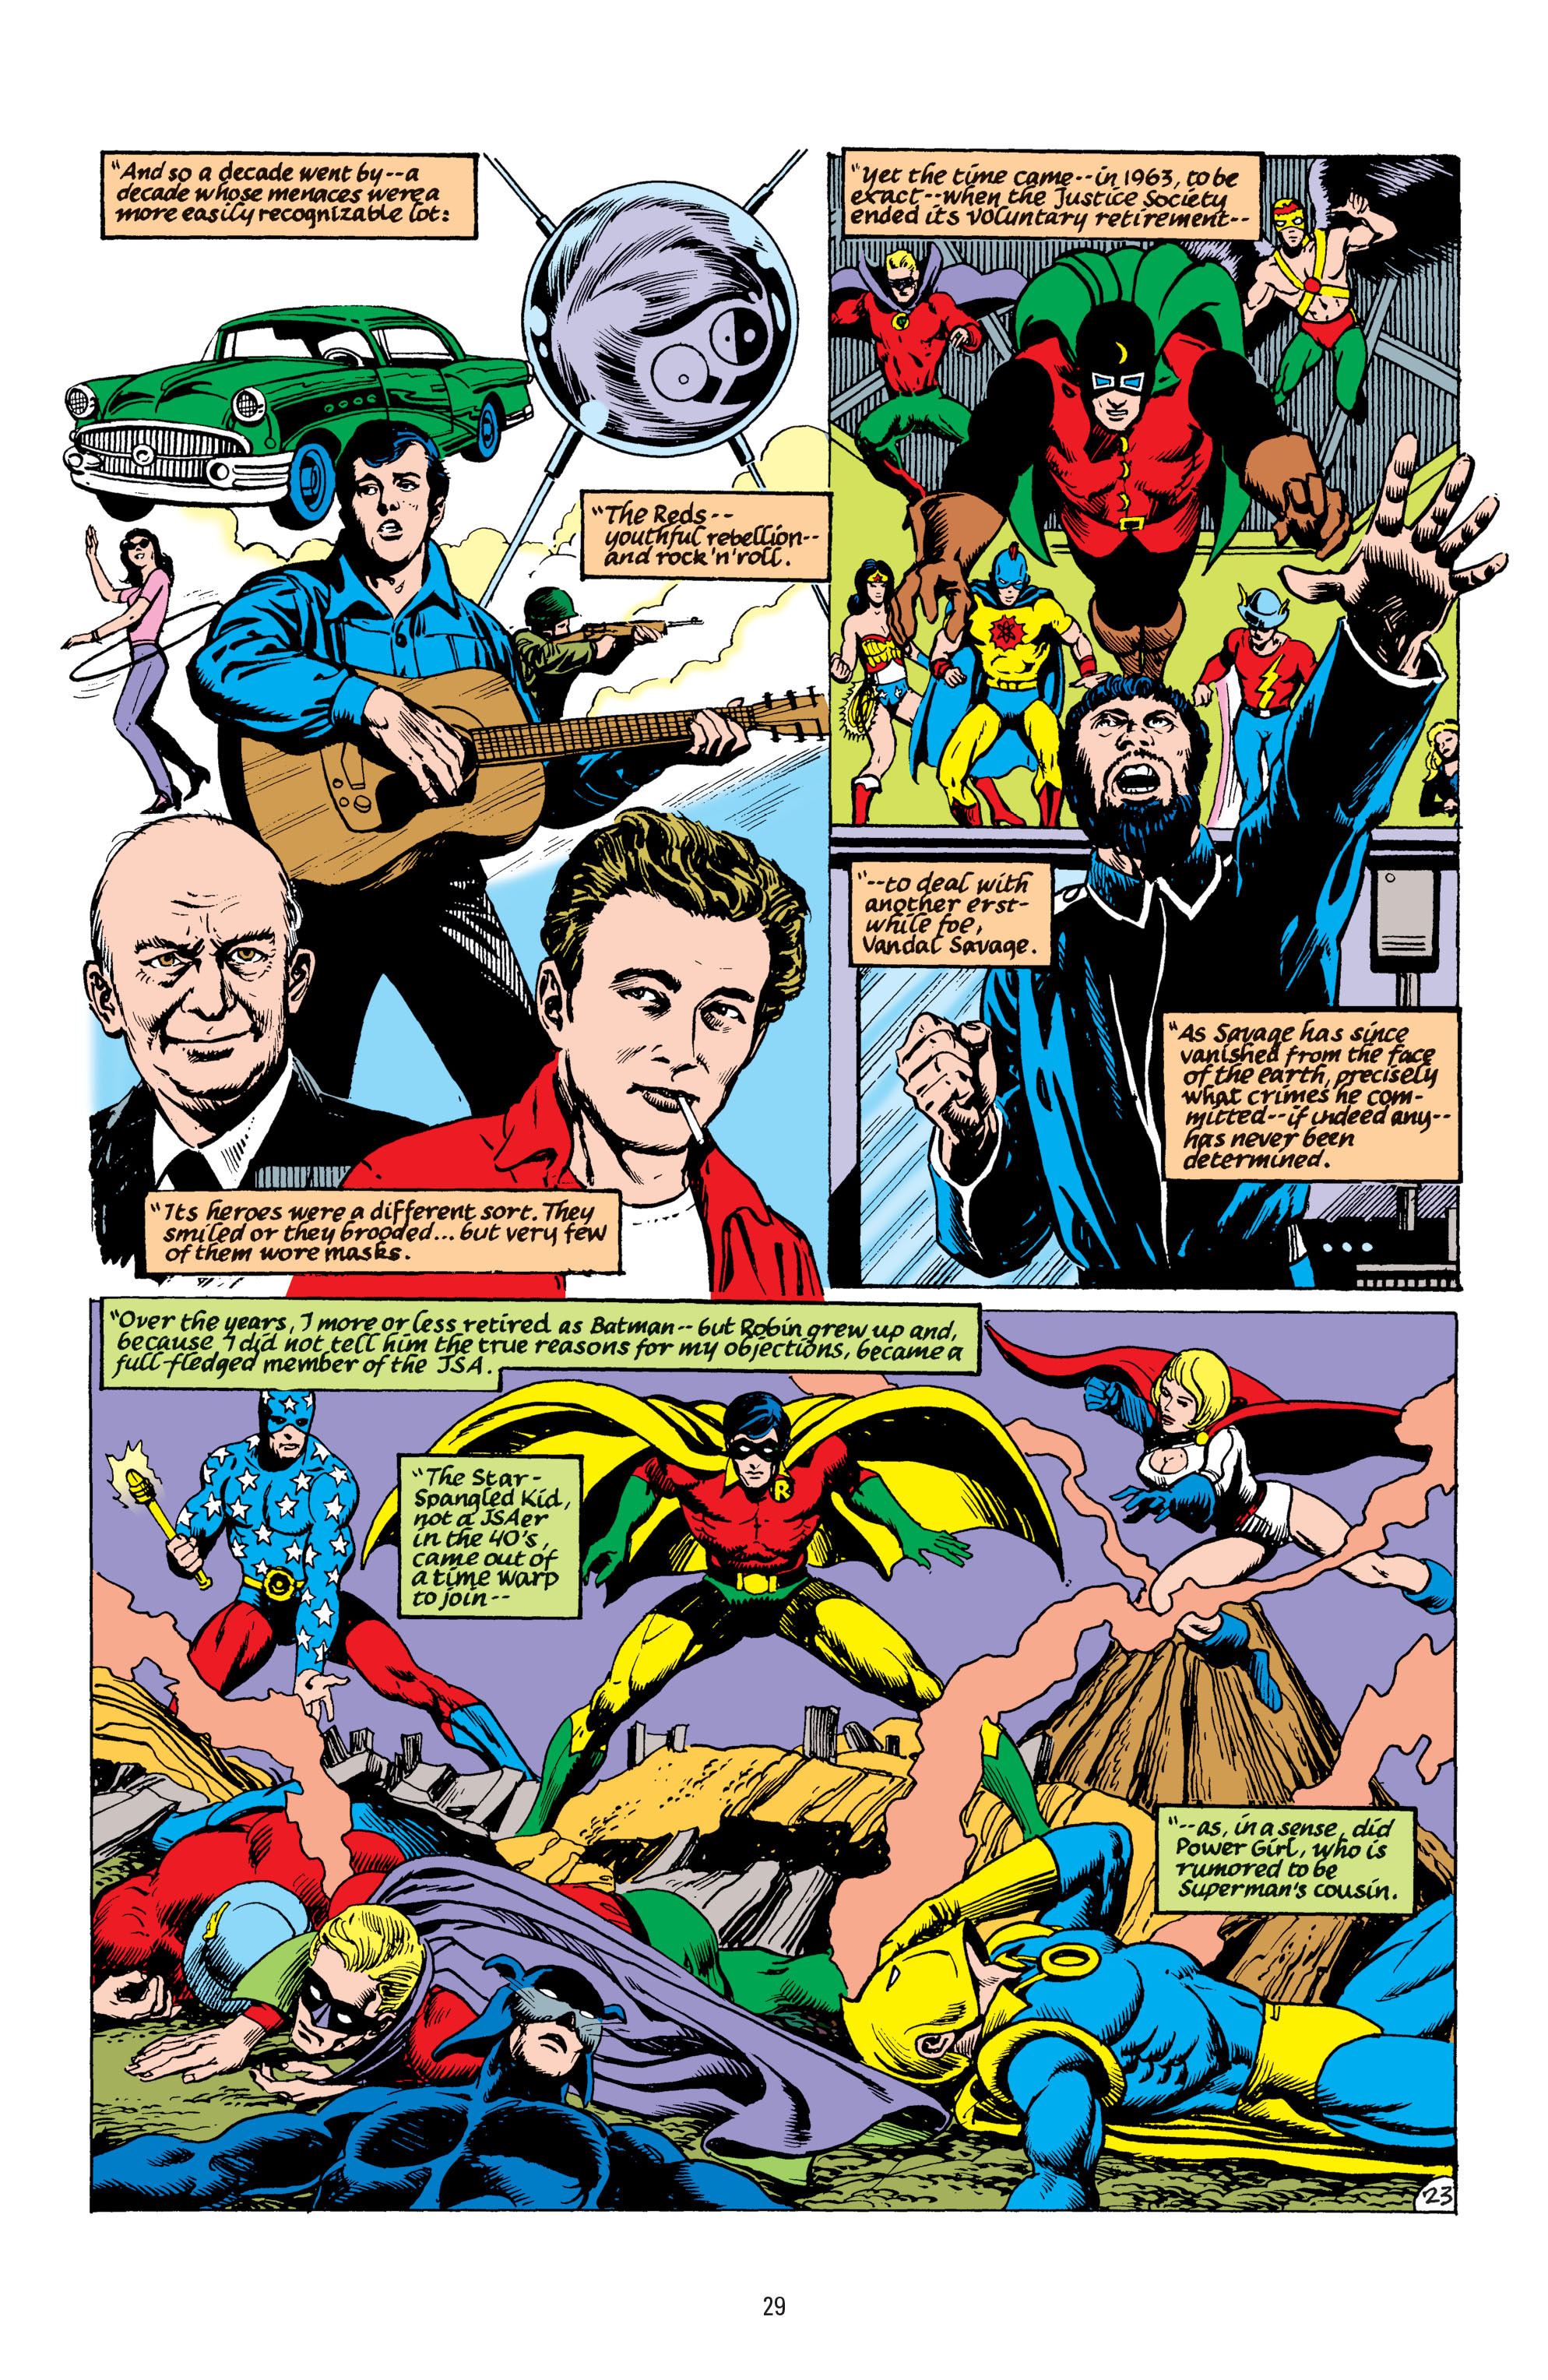 Read online America vs. the Justice Society comic -  Issue # TPB - 28